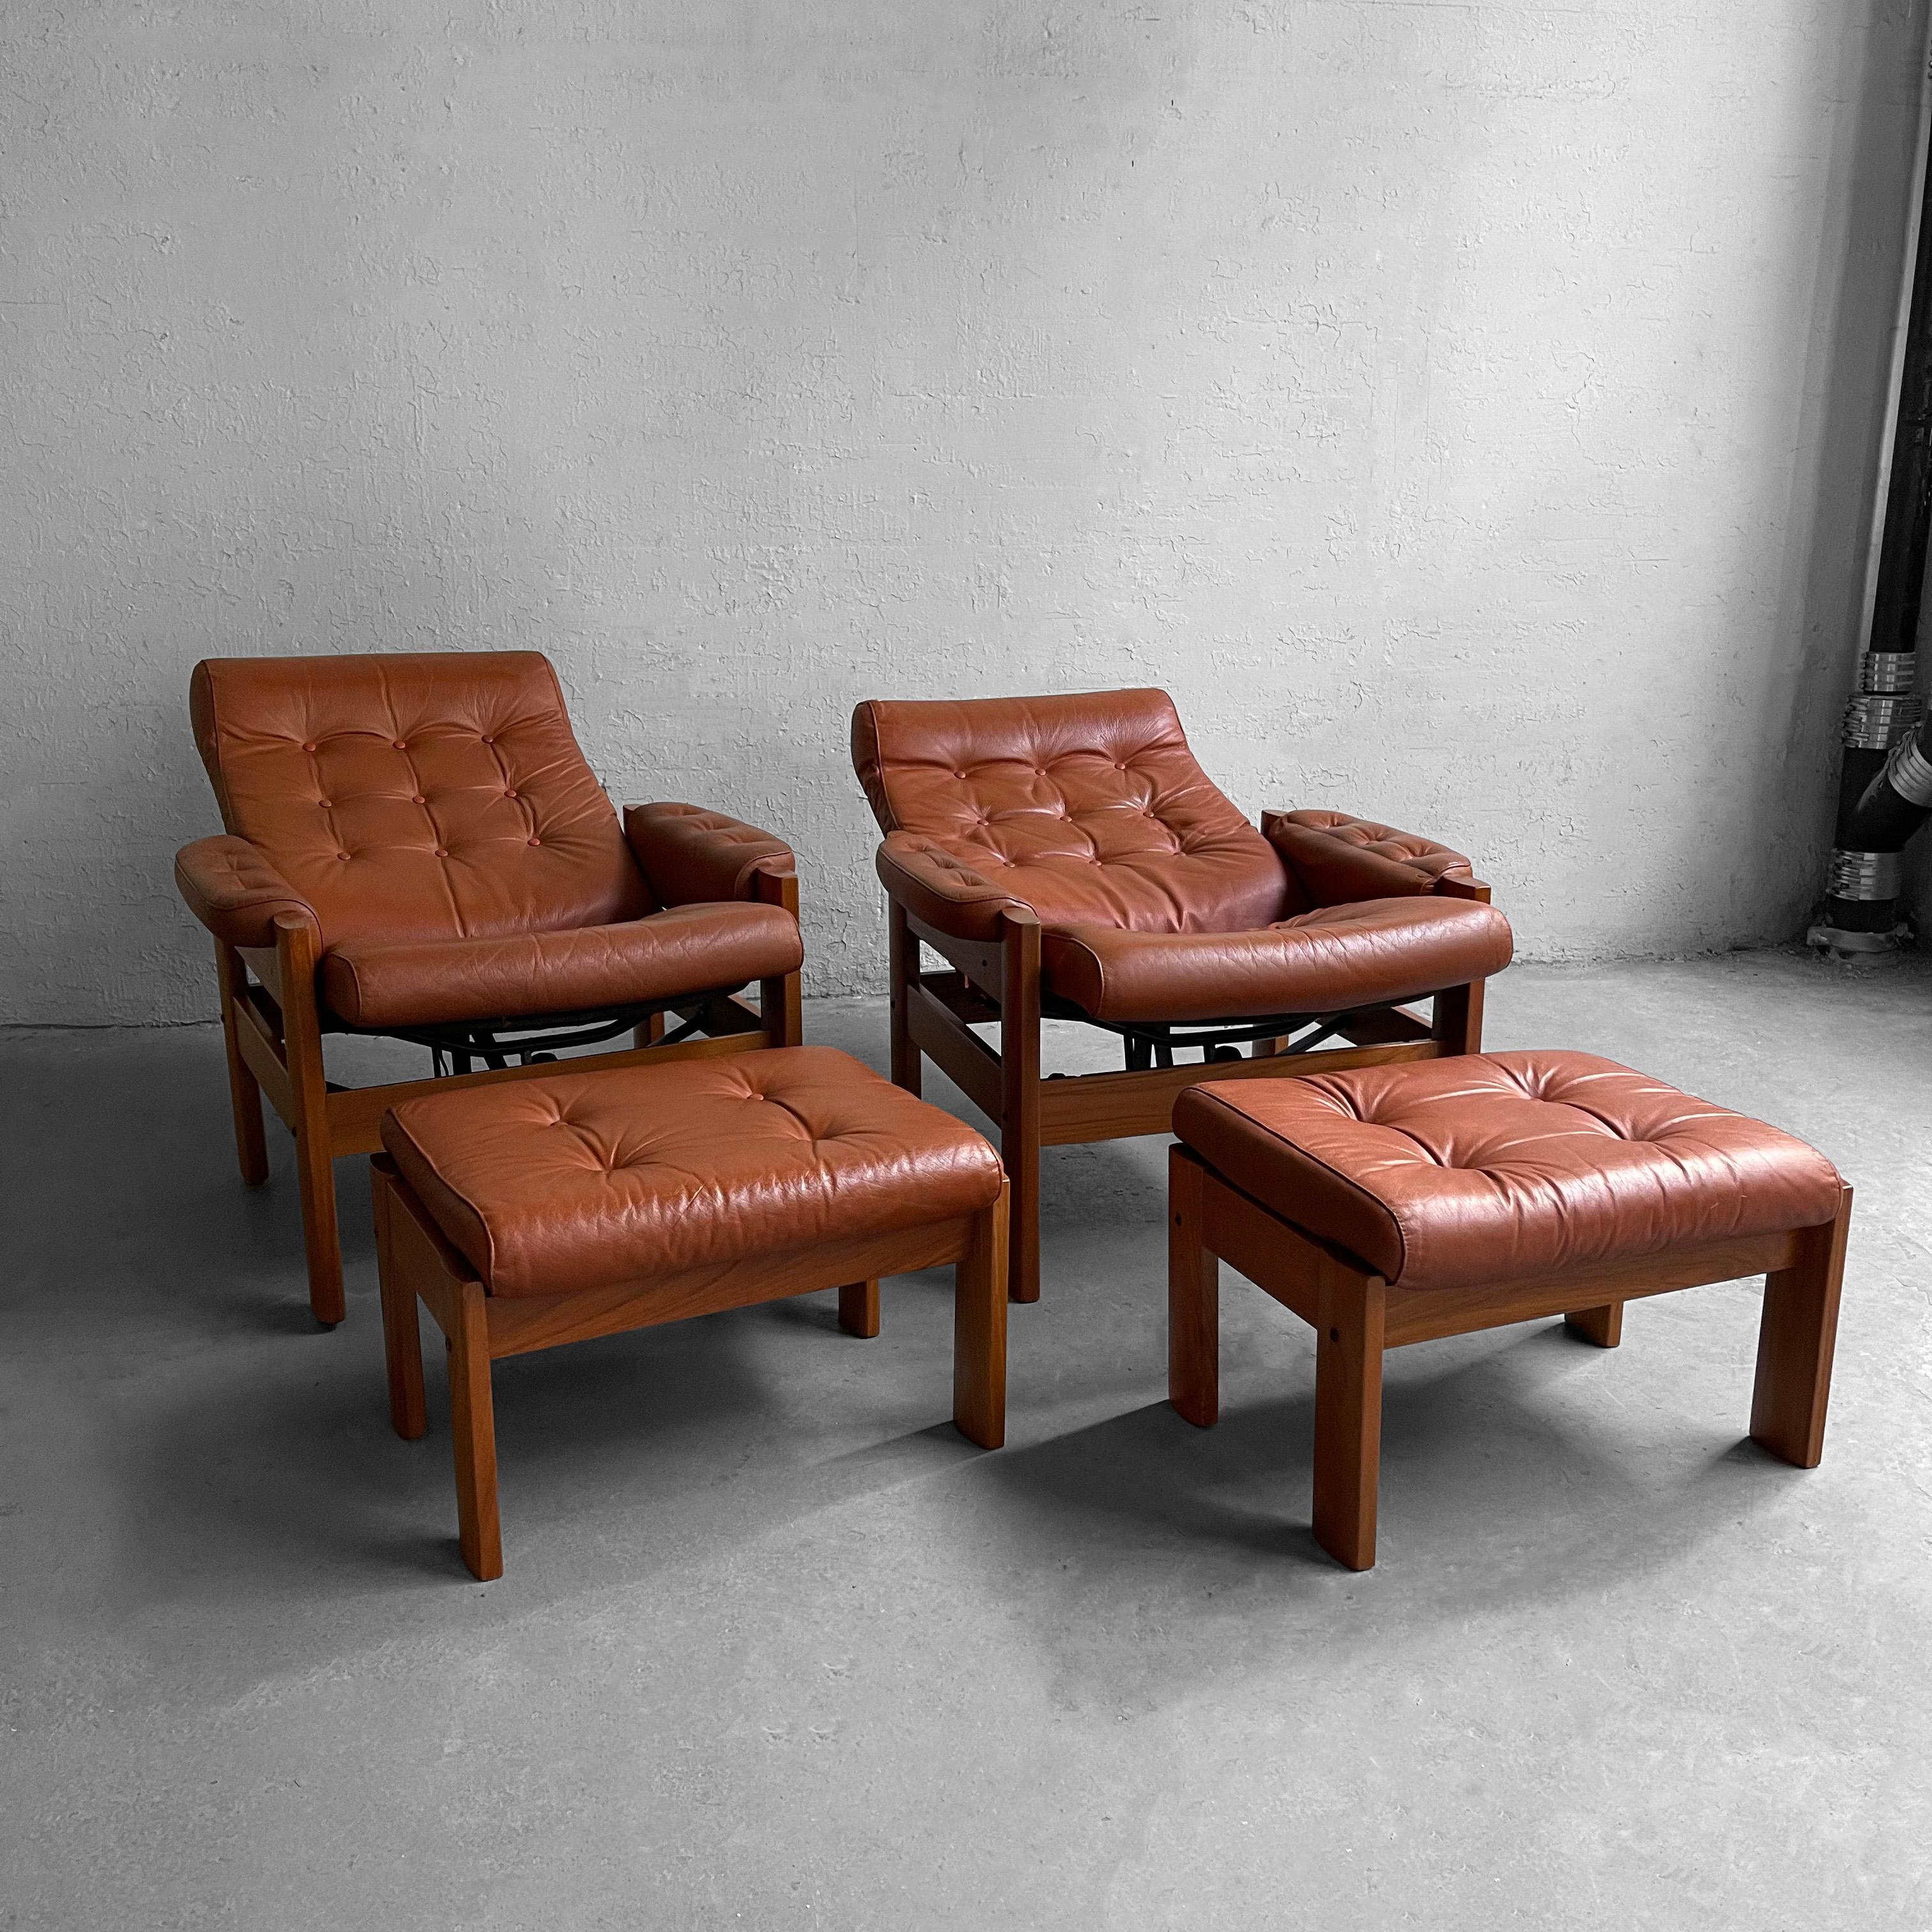 20th Century Scandinavian Modern Leather Recliners with Ottomans